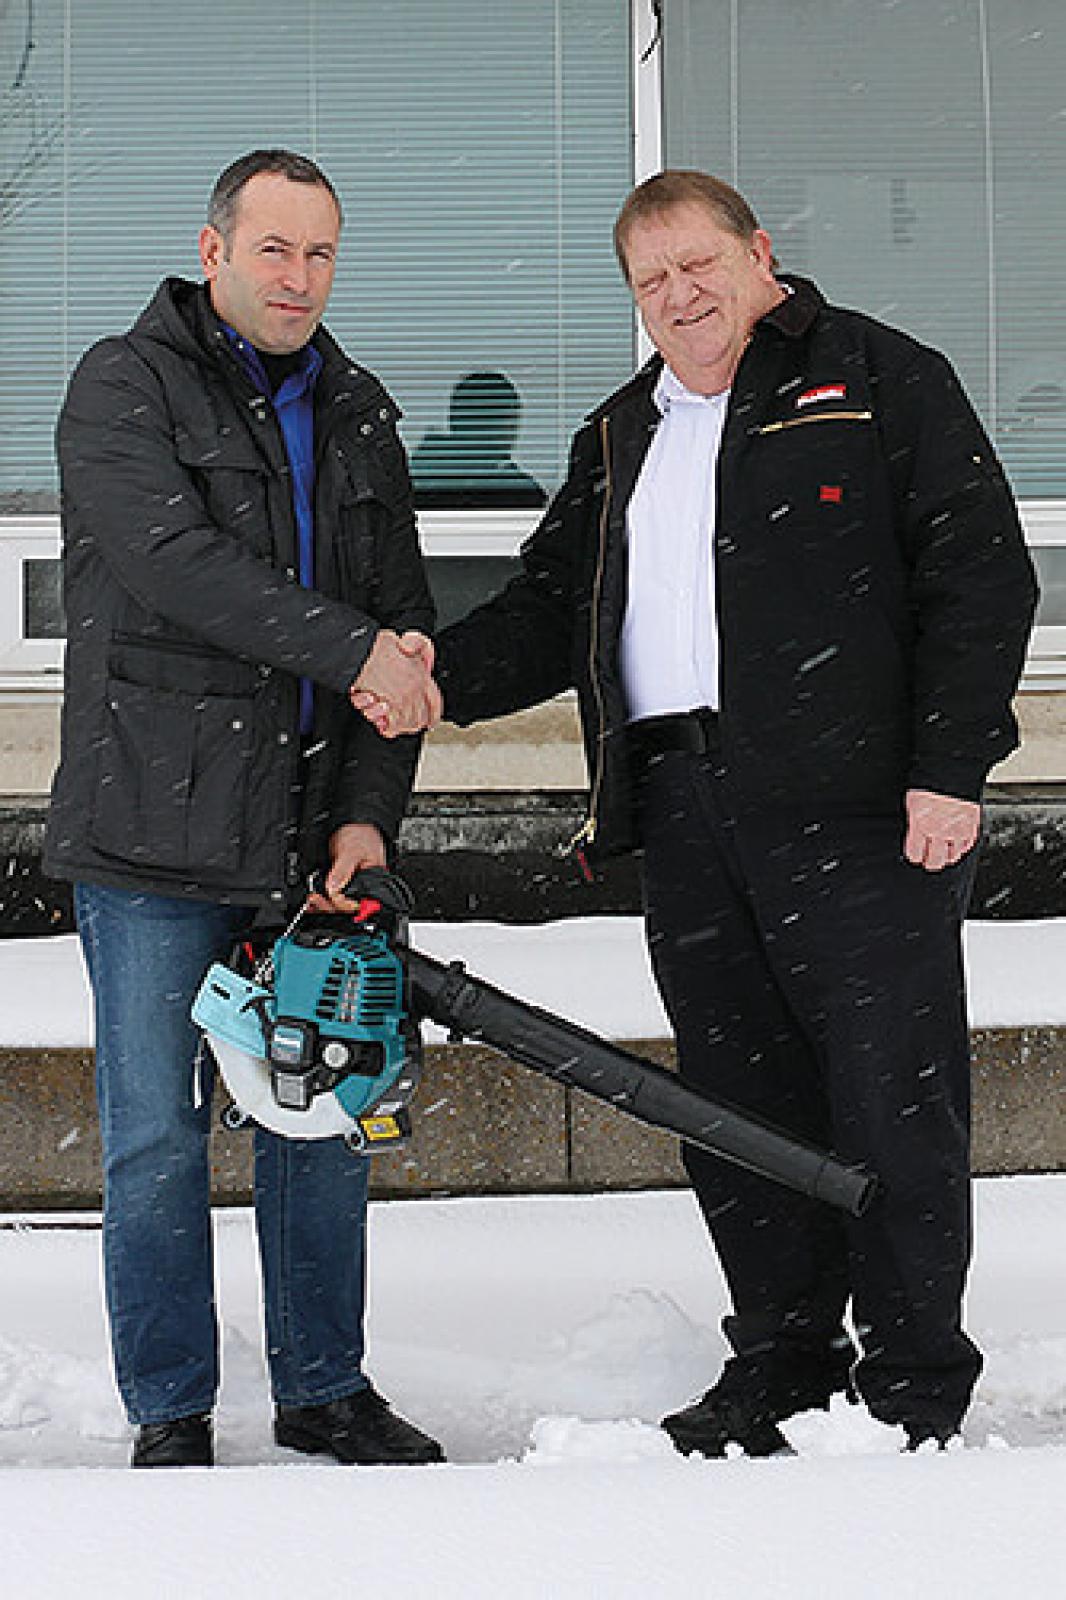 Lucky prize winner, Lutfi Dragusha of Target Group Services, Stoney Creek, was presented with the prize by Barry Collens, National Manager, Outdoor Power Equipment, Makita Canada.